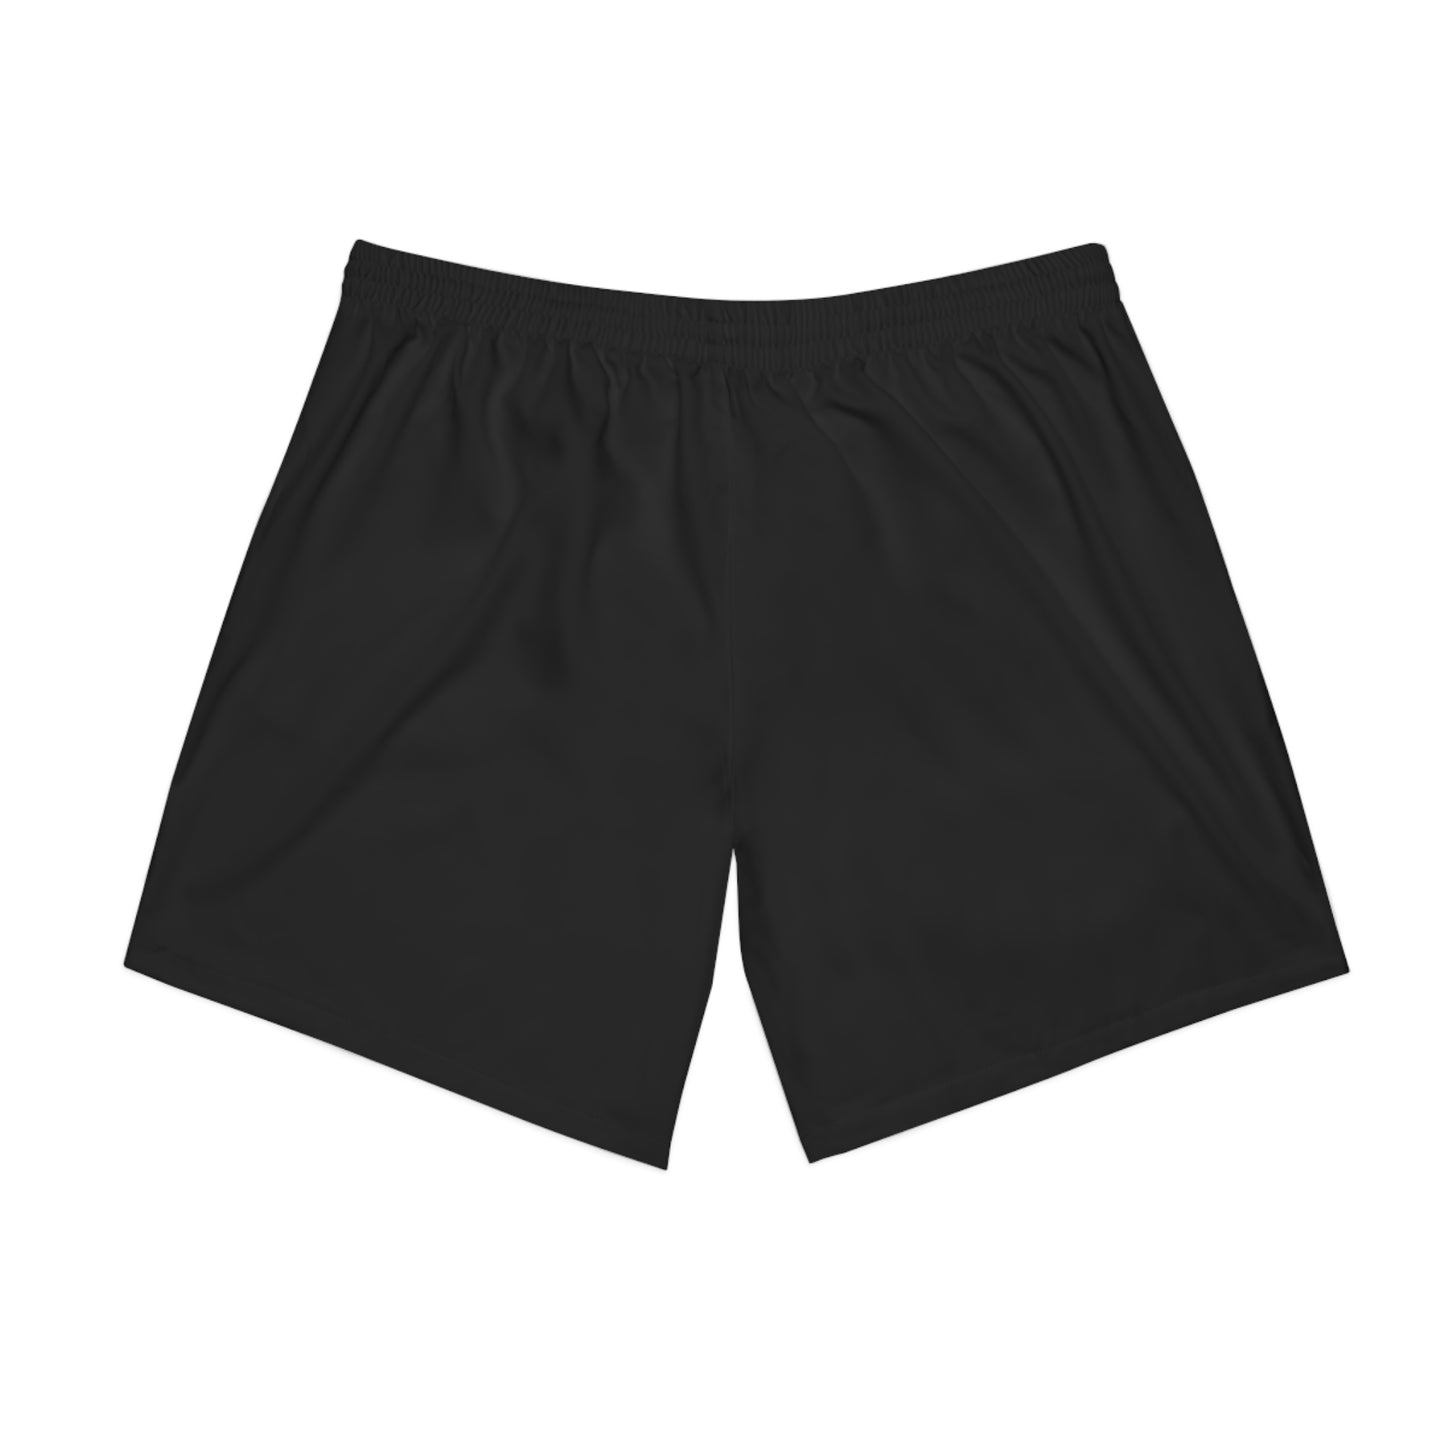 Atziluth Gallery " Dreams " Shorts (Black)